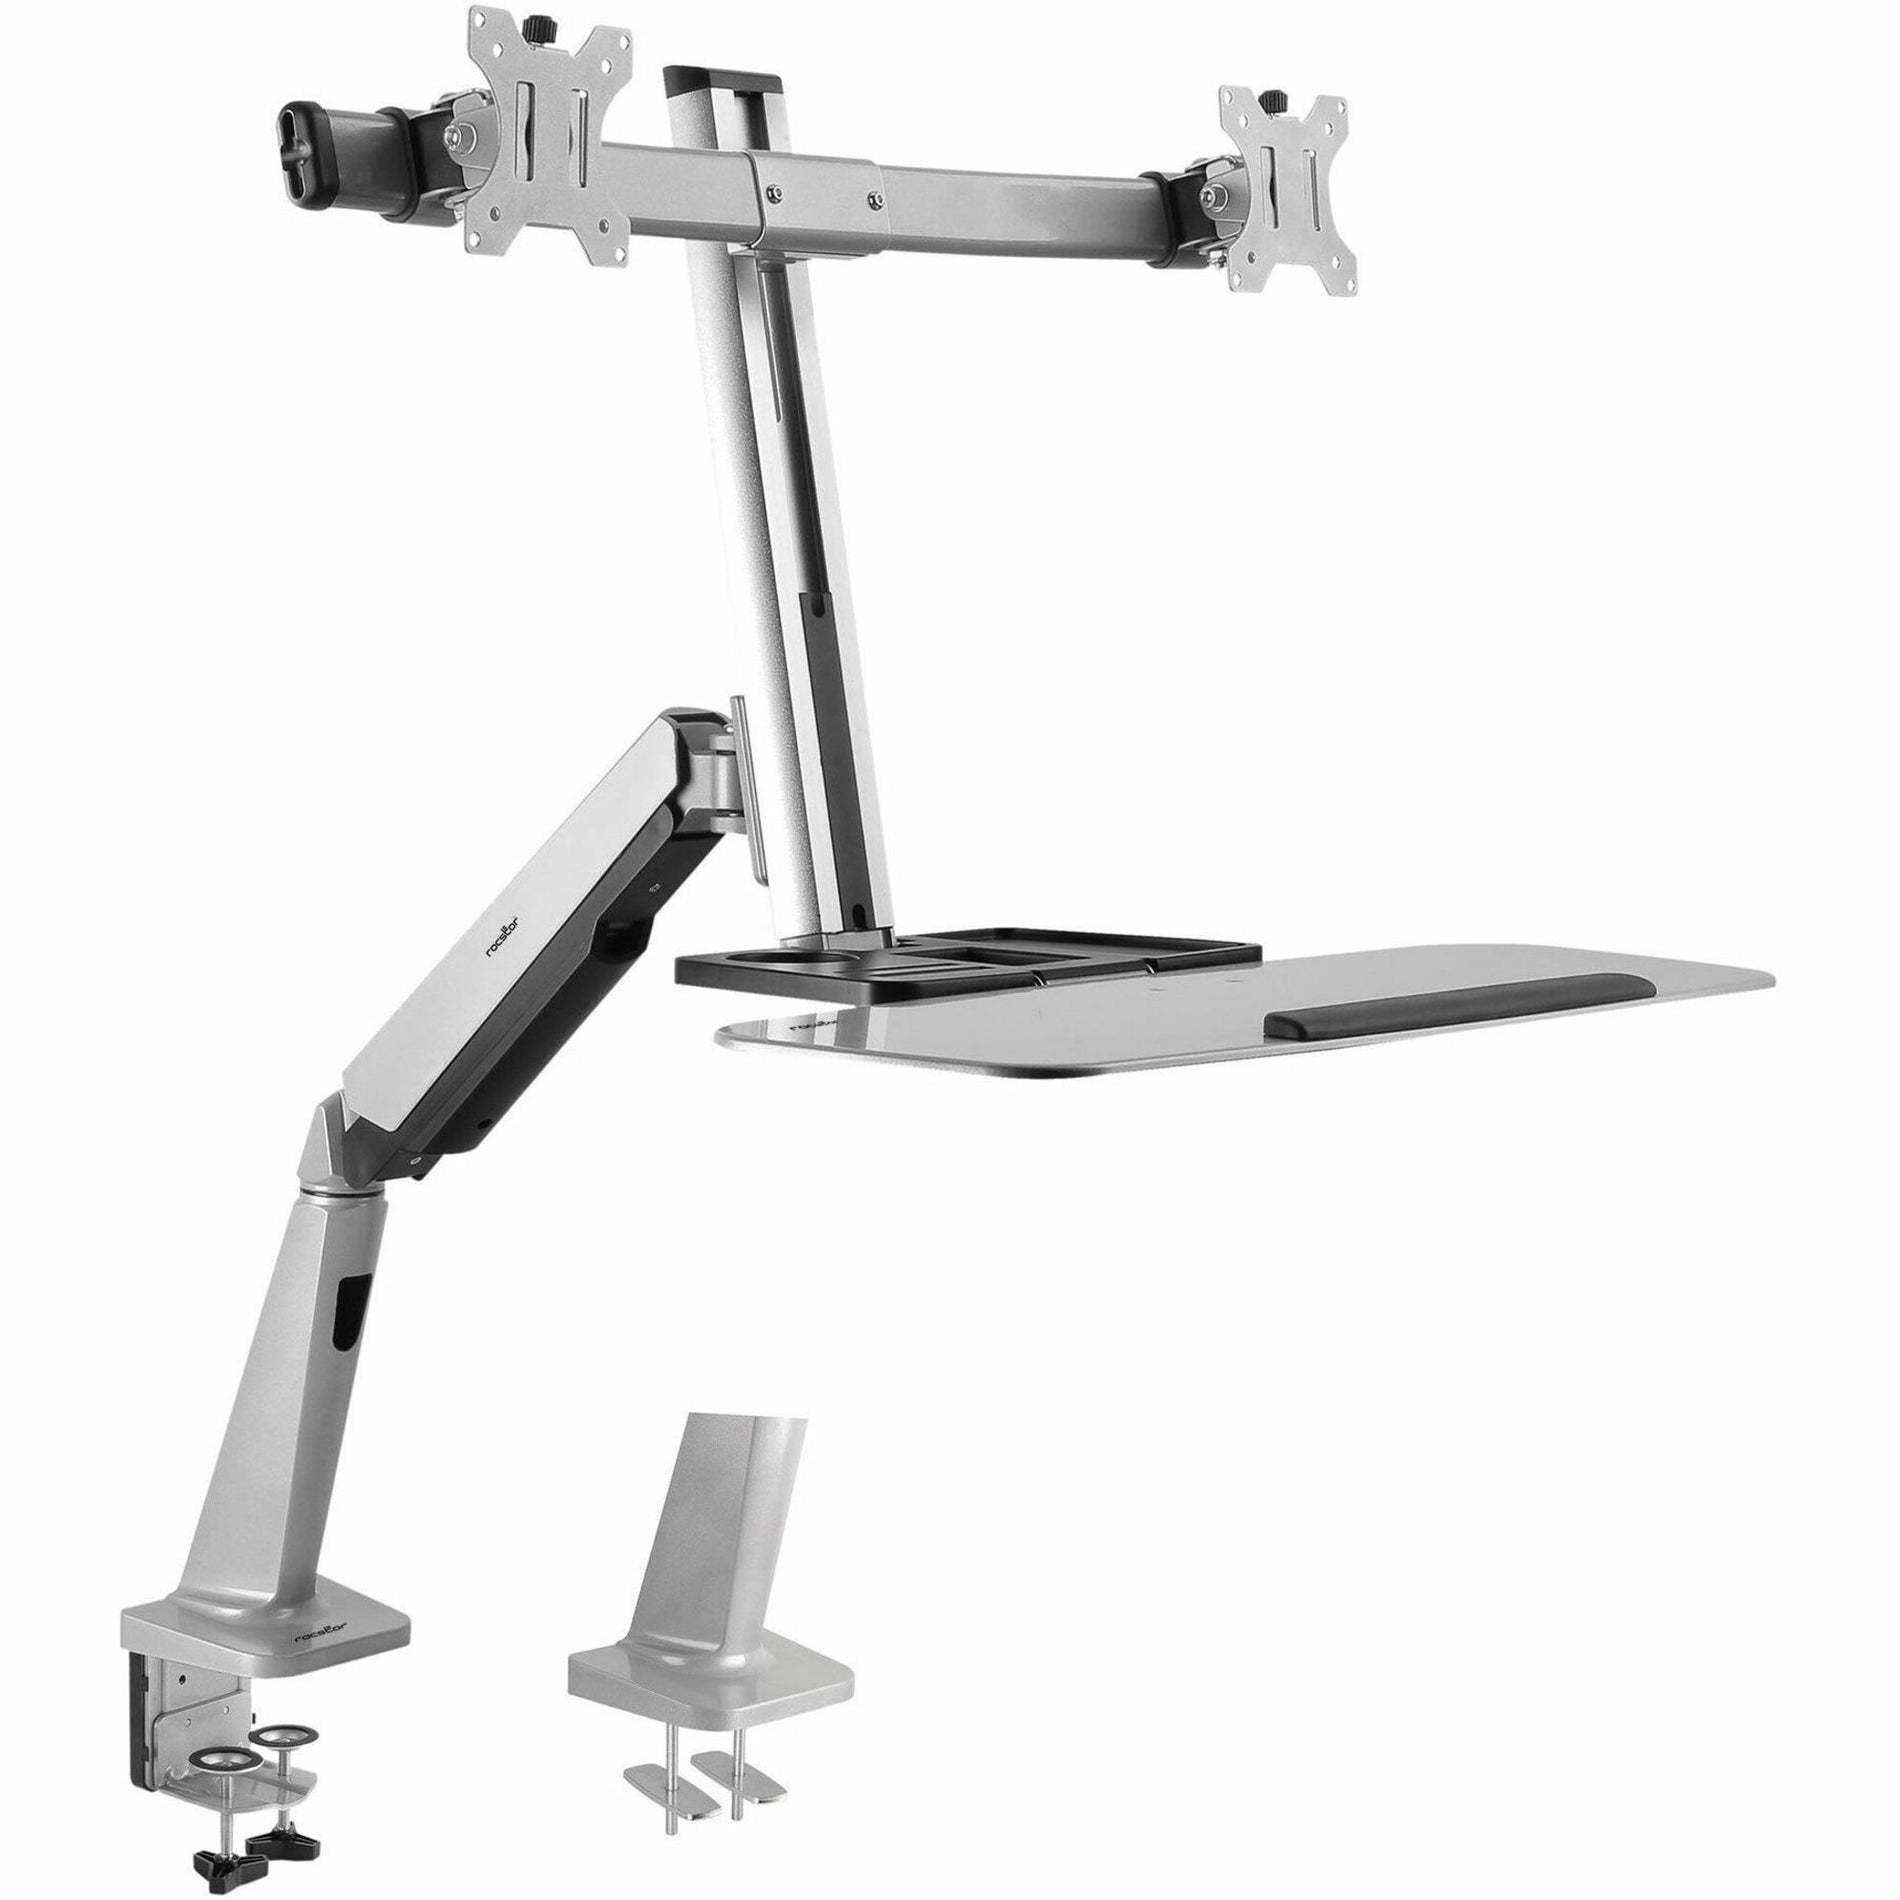 Rocstor ErgoCenter Desk Mount for Monitor, Mouse, Keyboard - Silver - TAA Compliant (Y10N029-S1)